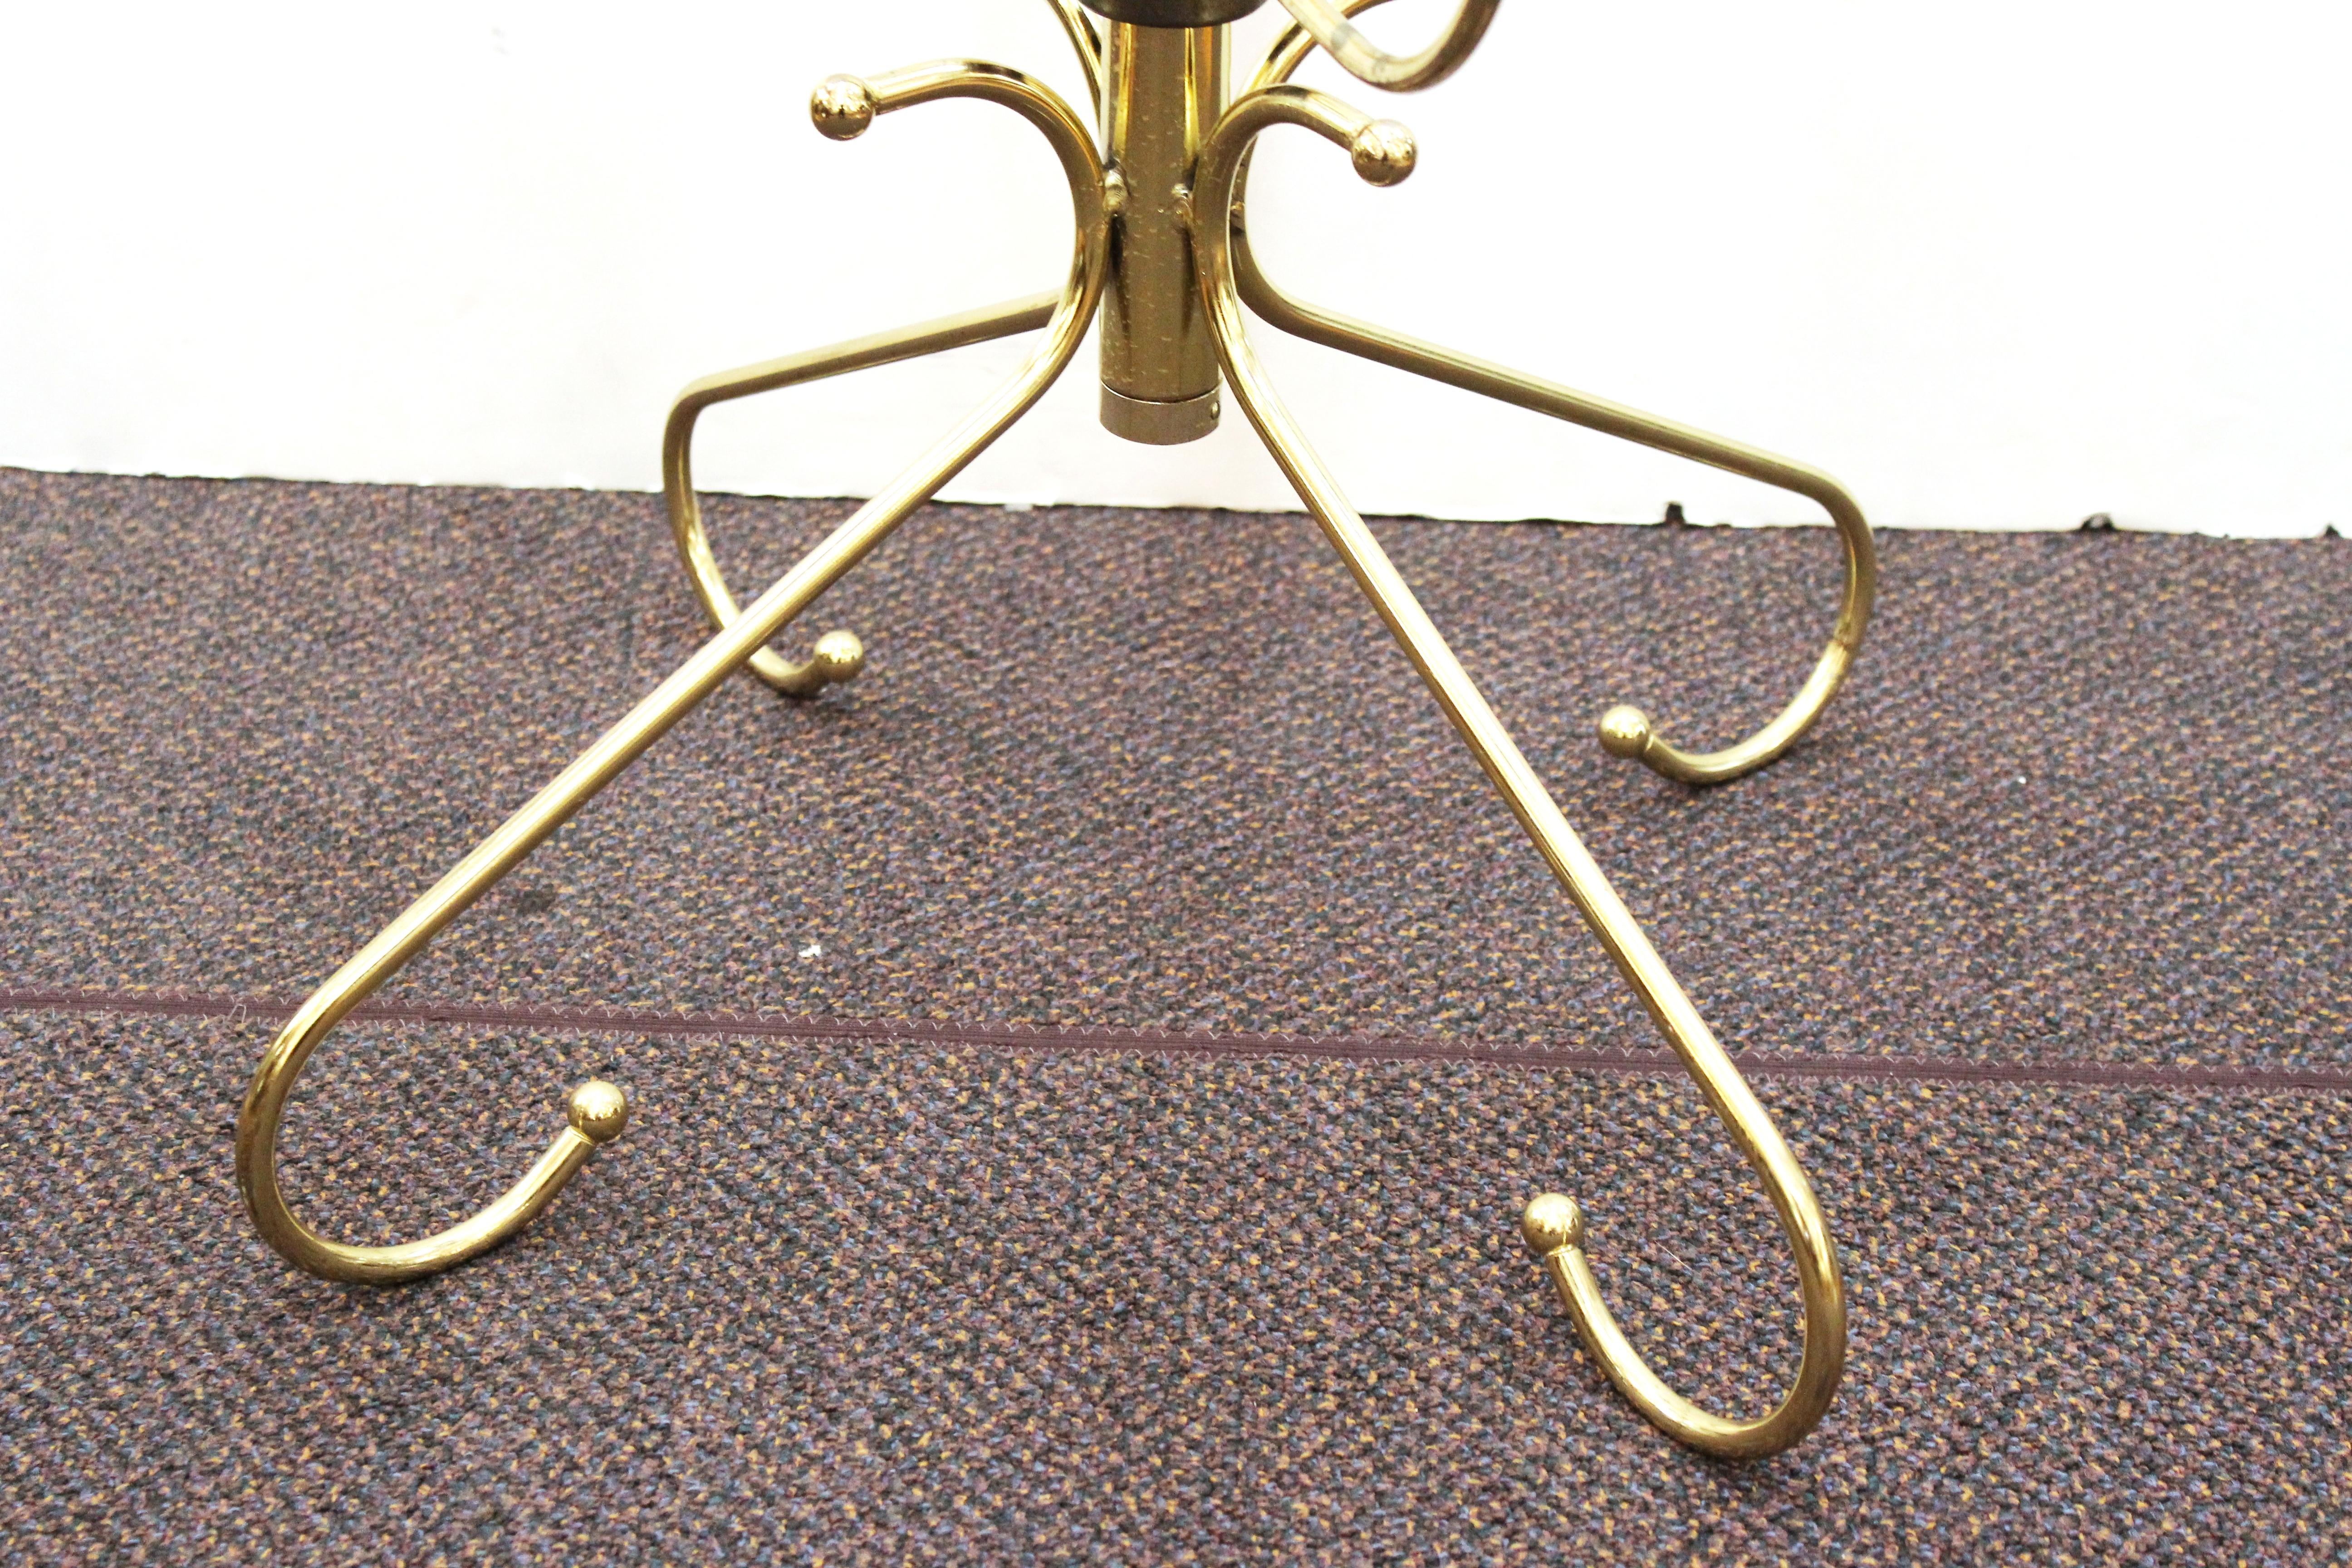 Mid-20th Century American Art Deco Brass Rotating Hat Stand with Six Tiers